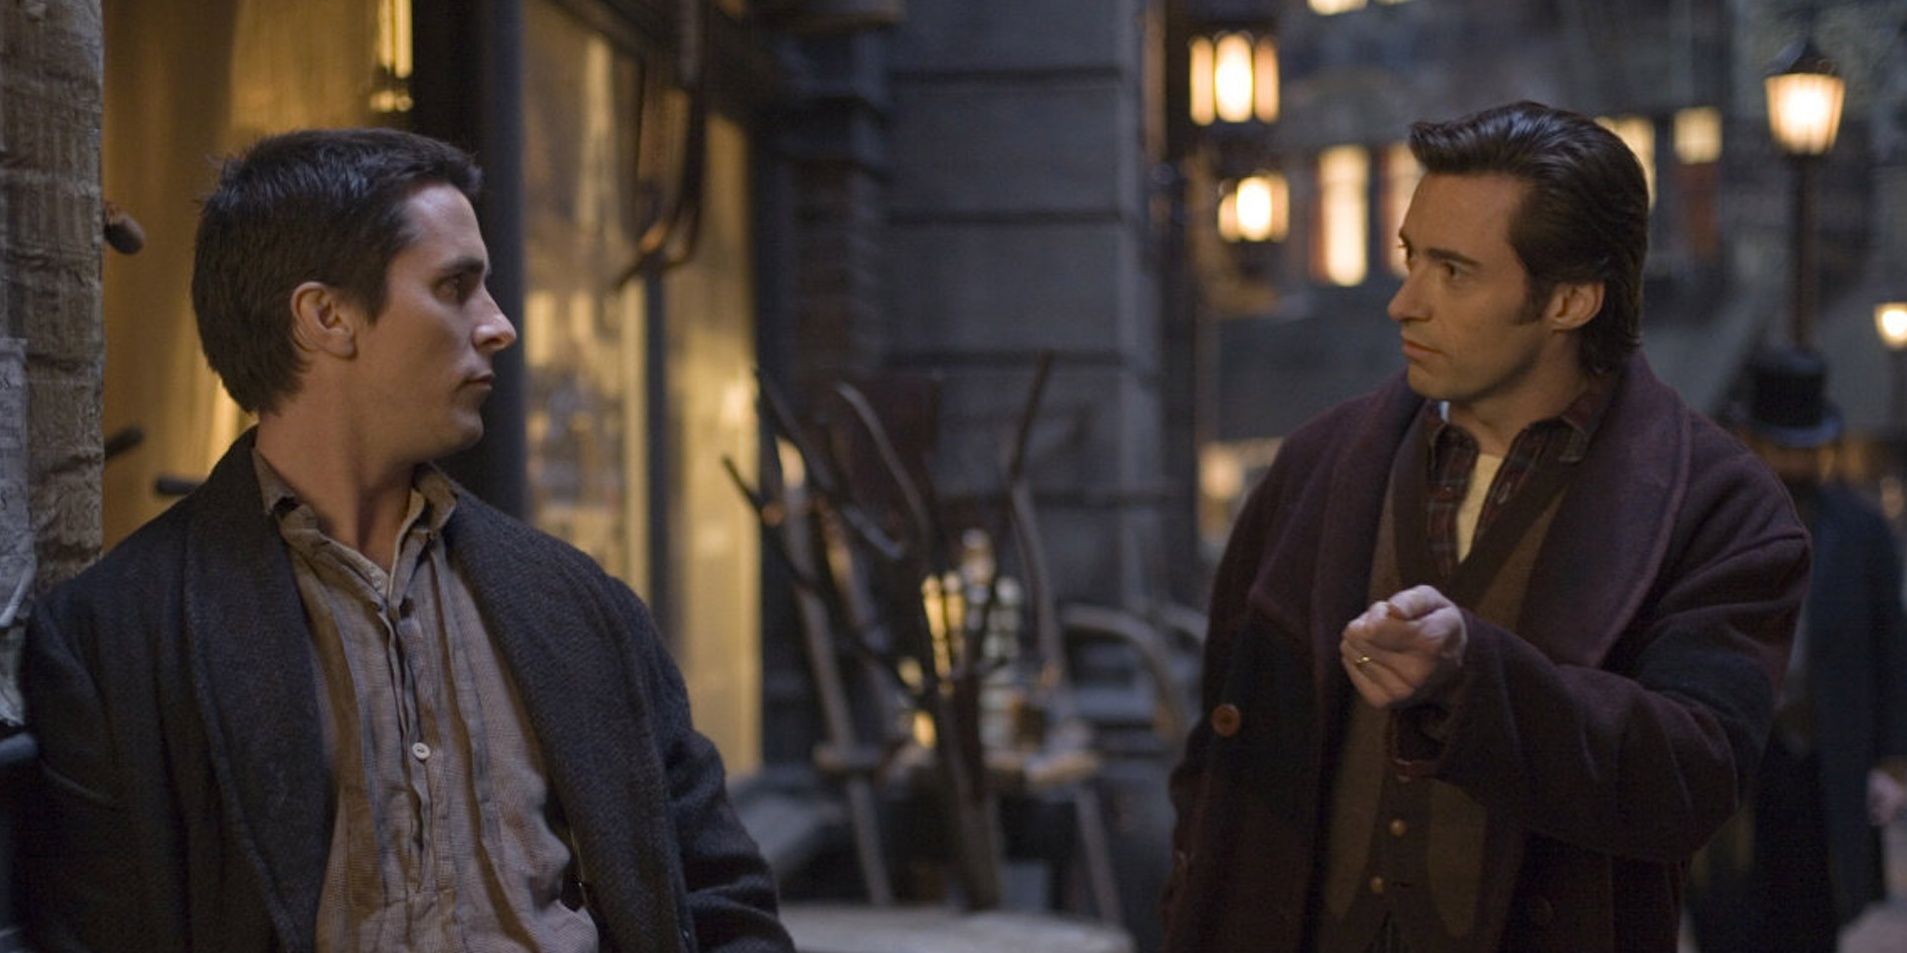 Borden and Angier talking on the street in The Prestige